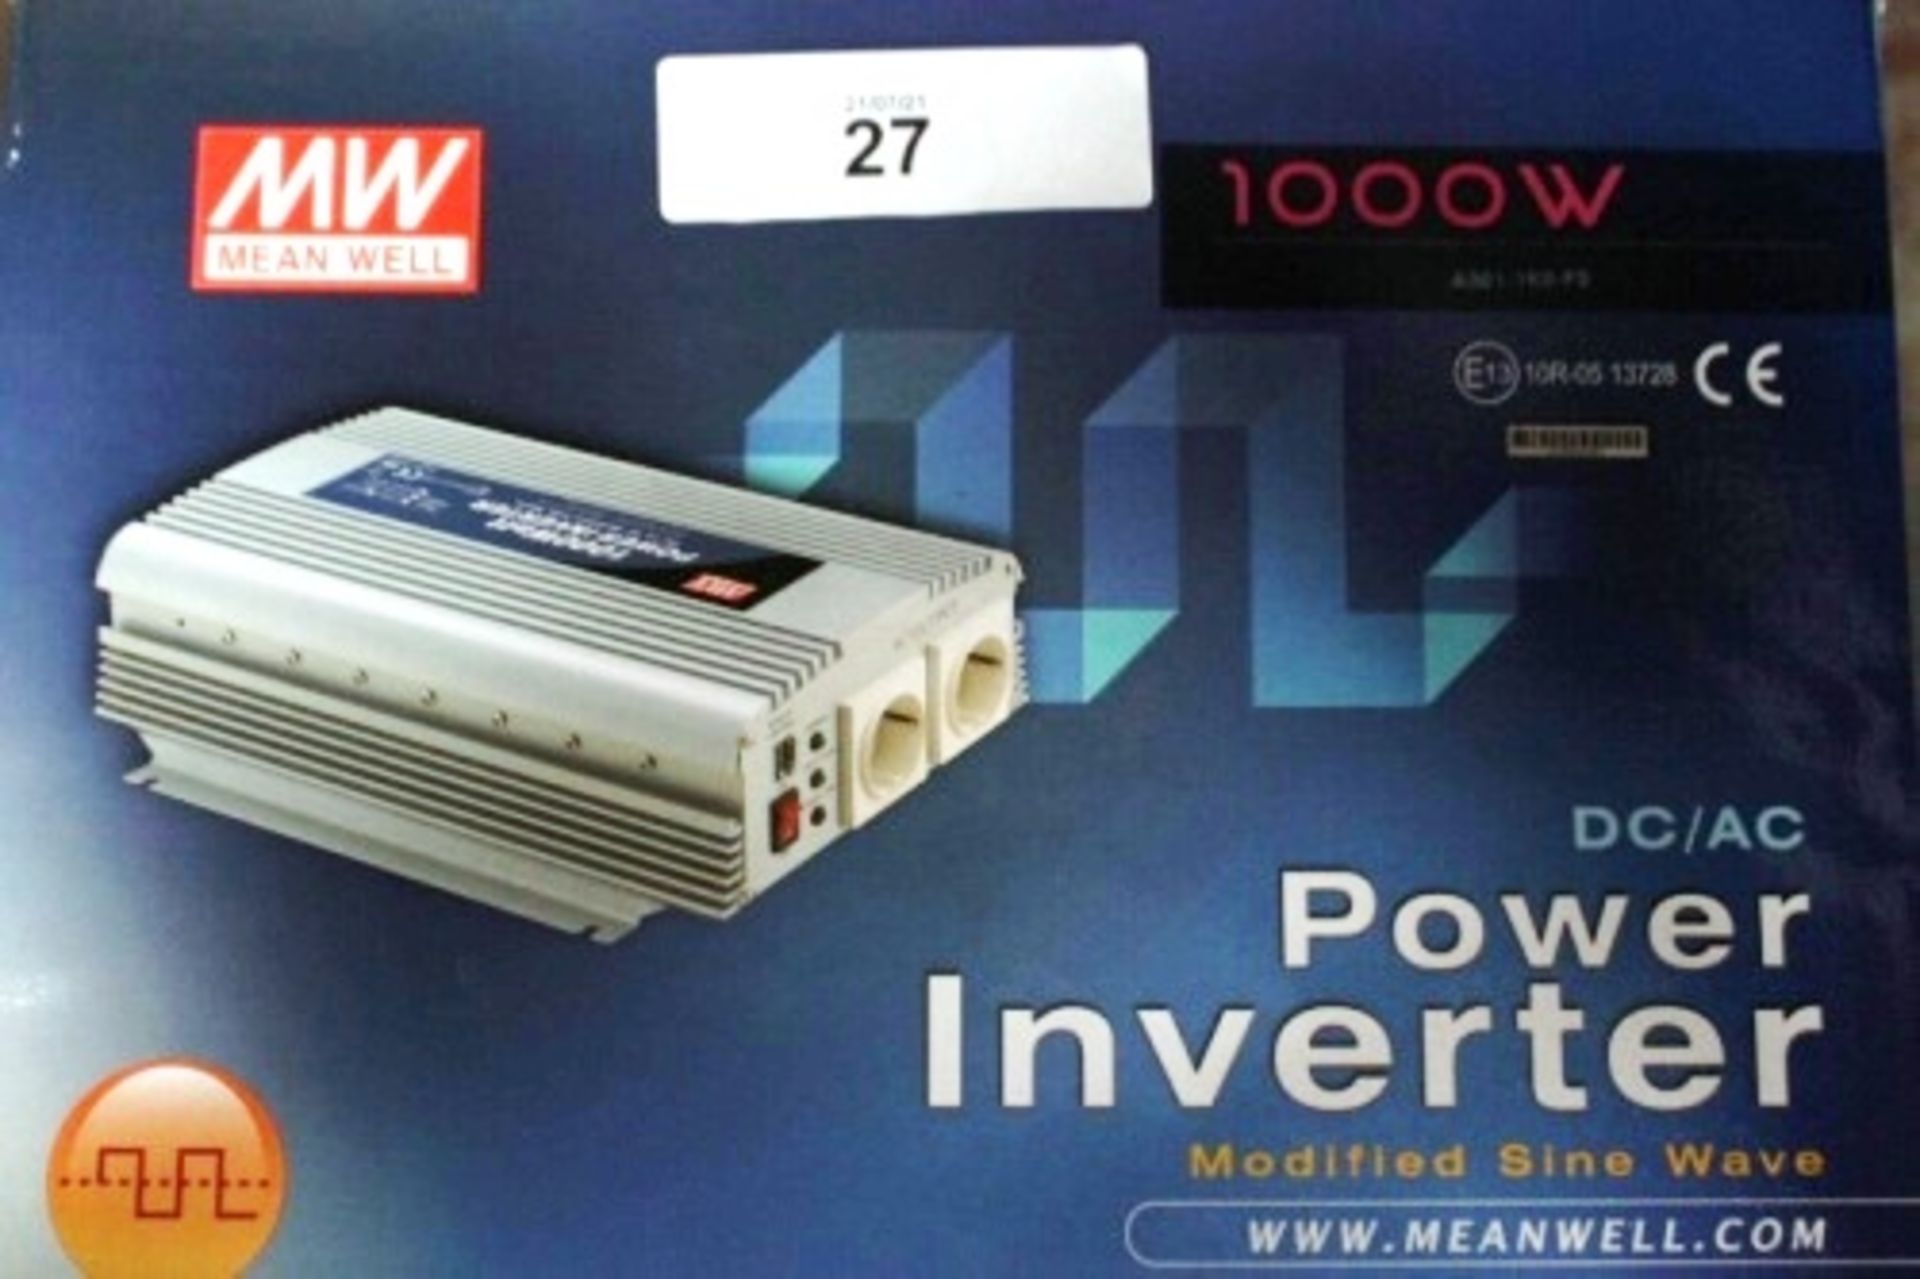 1 x Mean Well 1000W DC/AC power inverter, model 10R-0513728, 230VAC - New in box (ES5end)